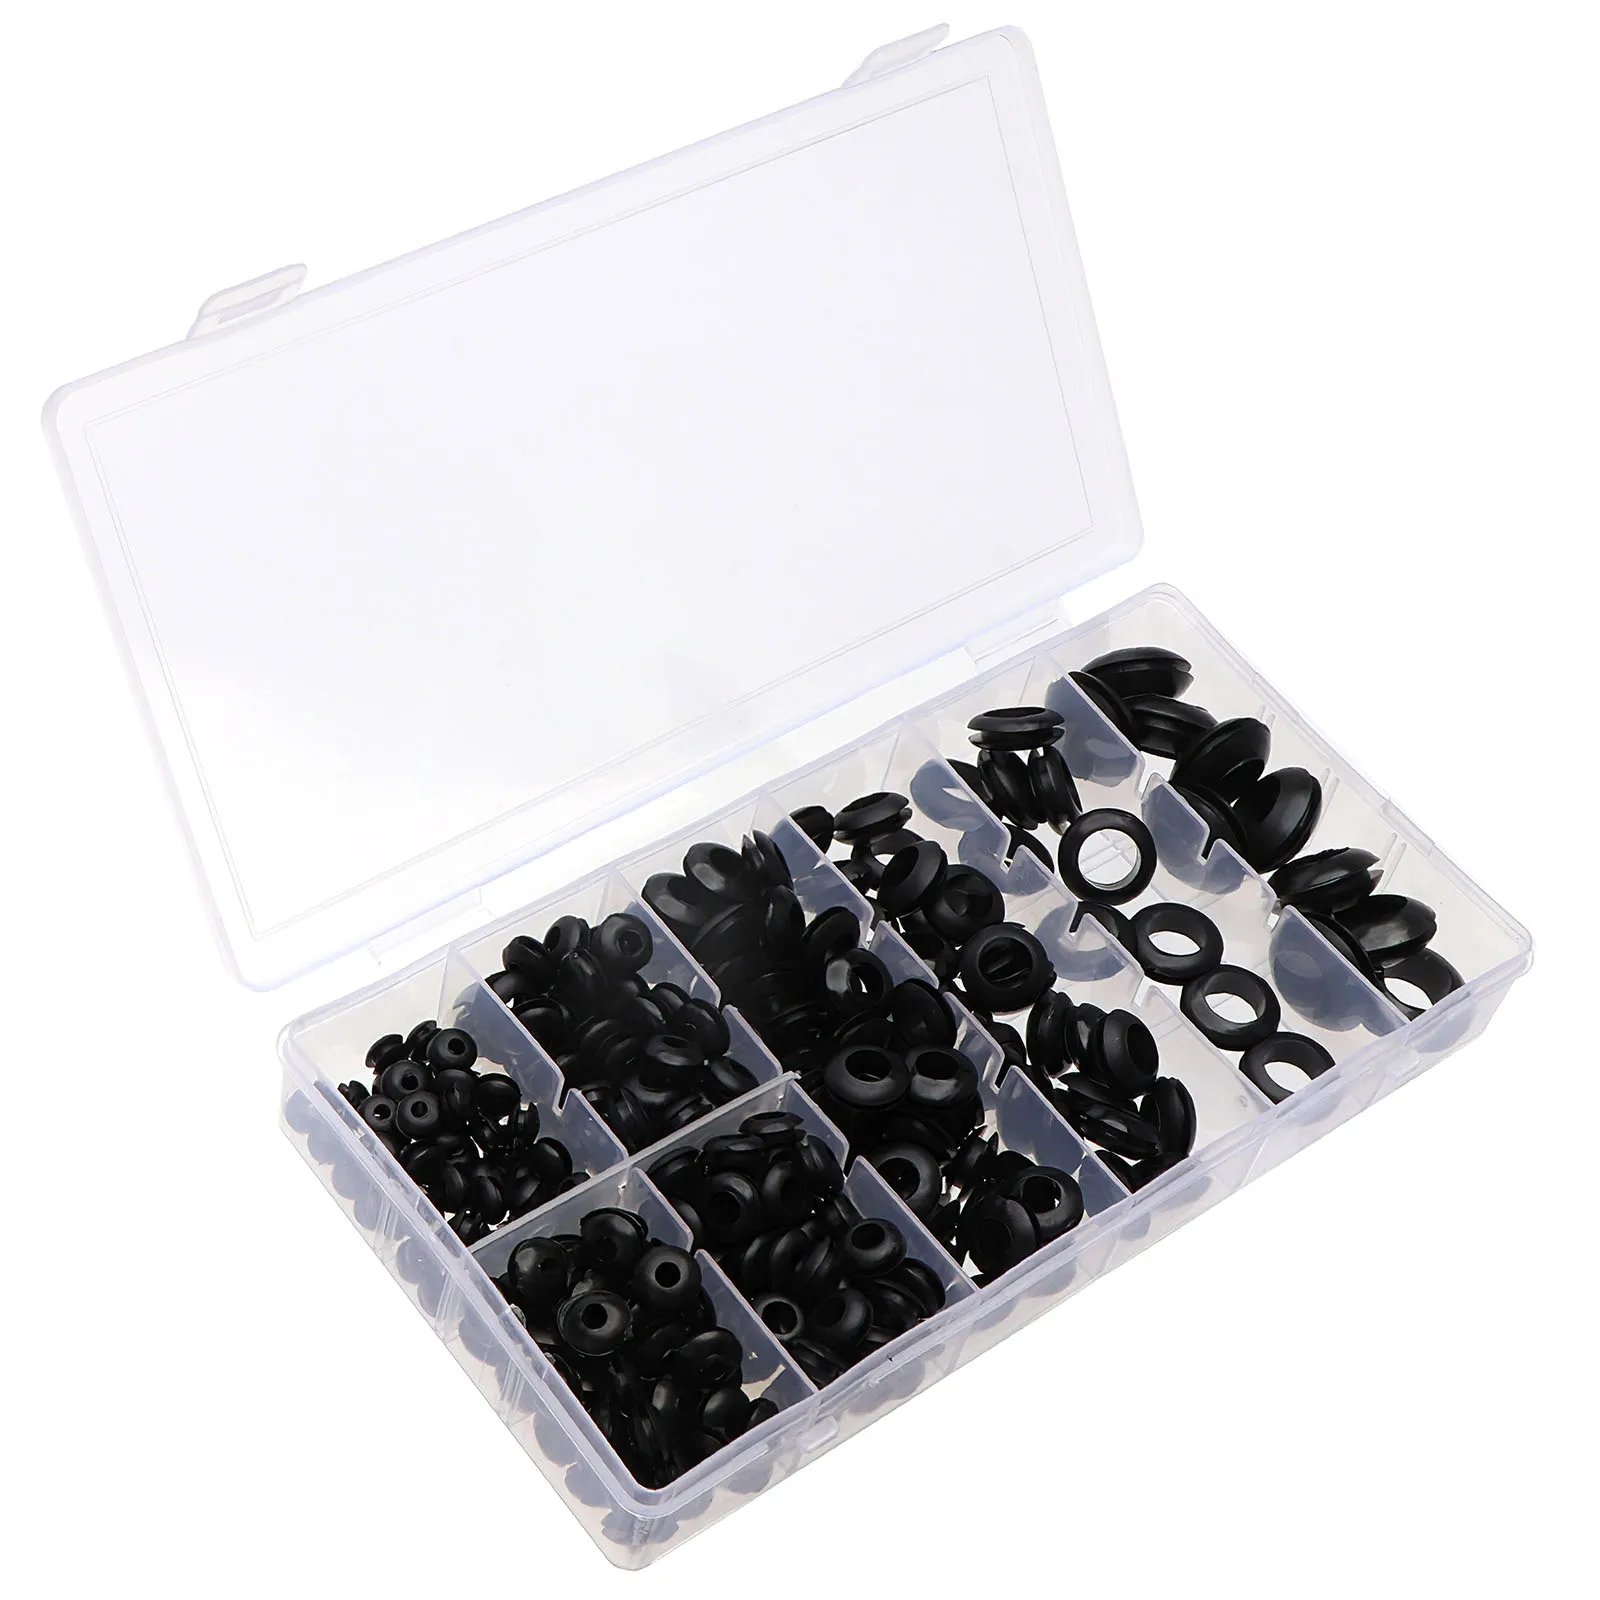 

295pcs Rubber Grommets Retaining Ring Set Seal Assortment Protection Coil with Box for Blanking Hole / Wiring Cable / Gasket Kit